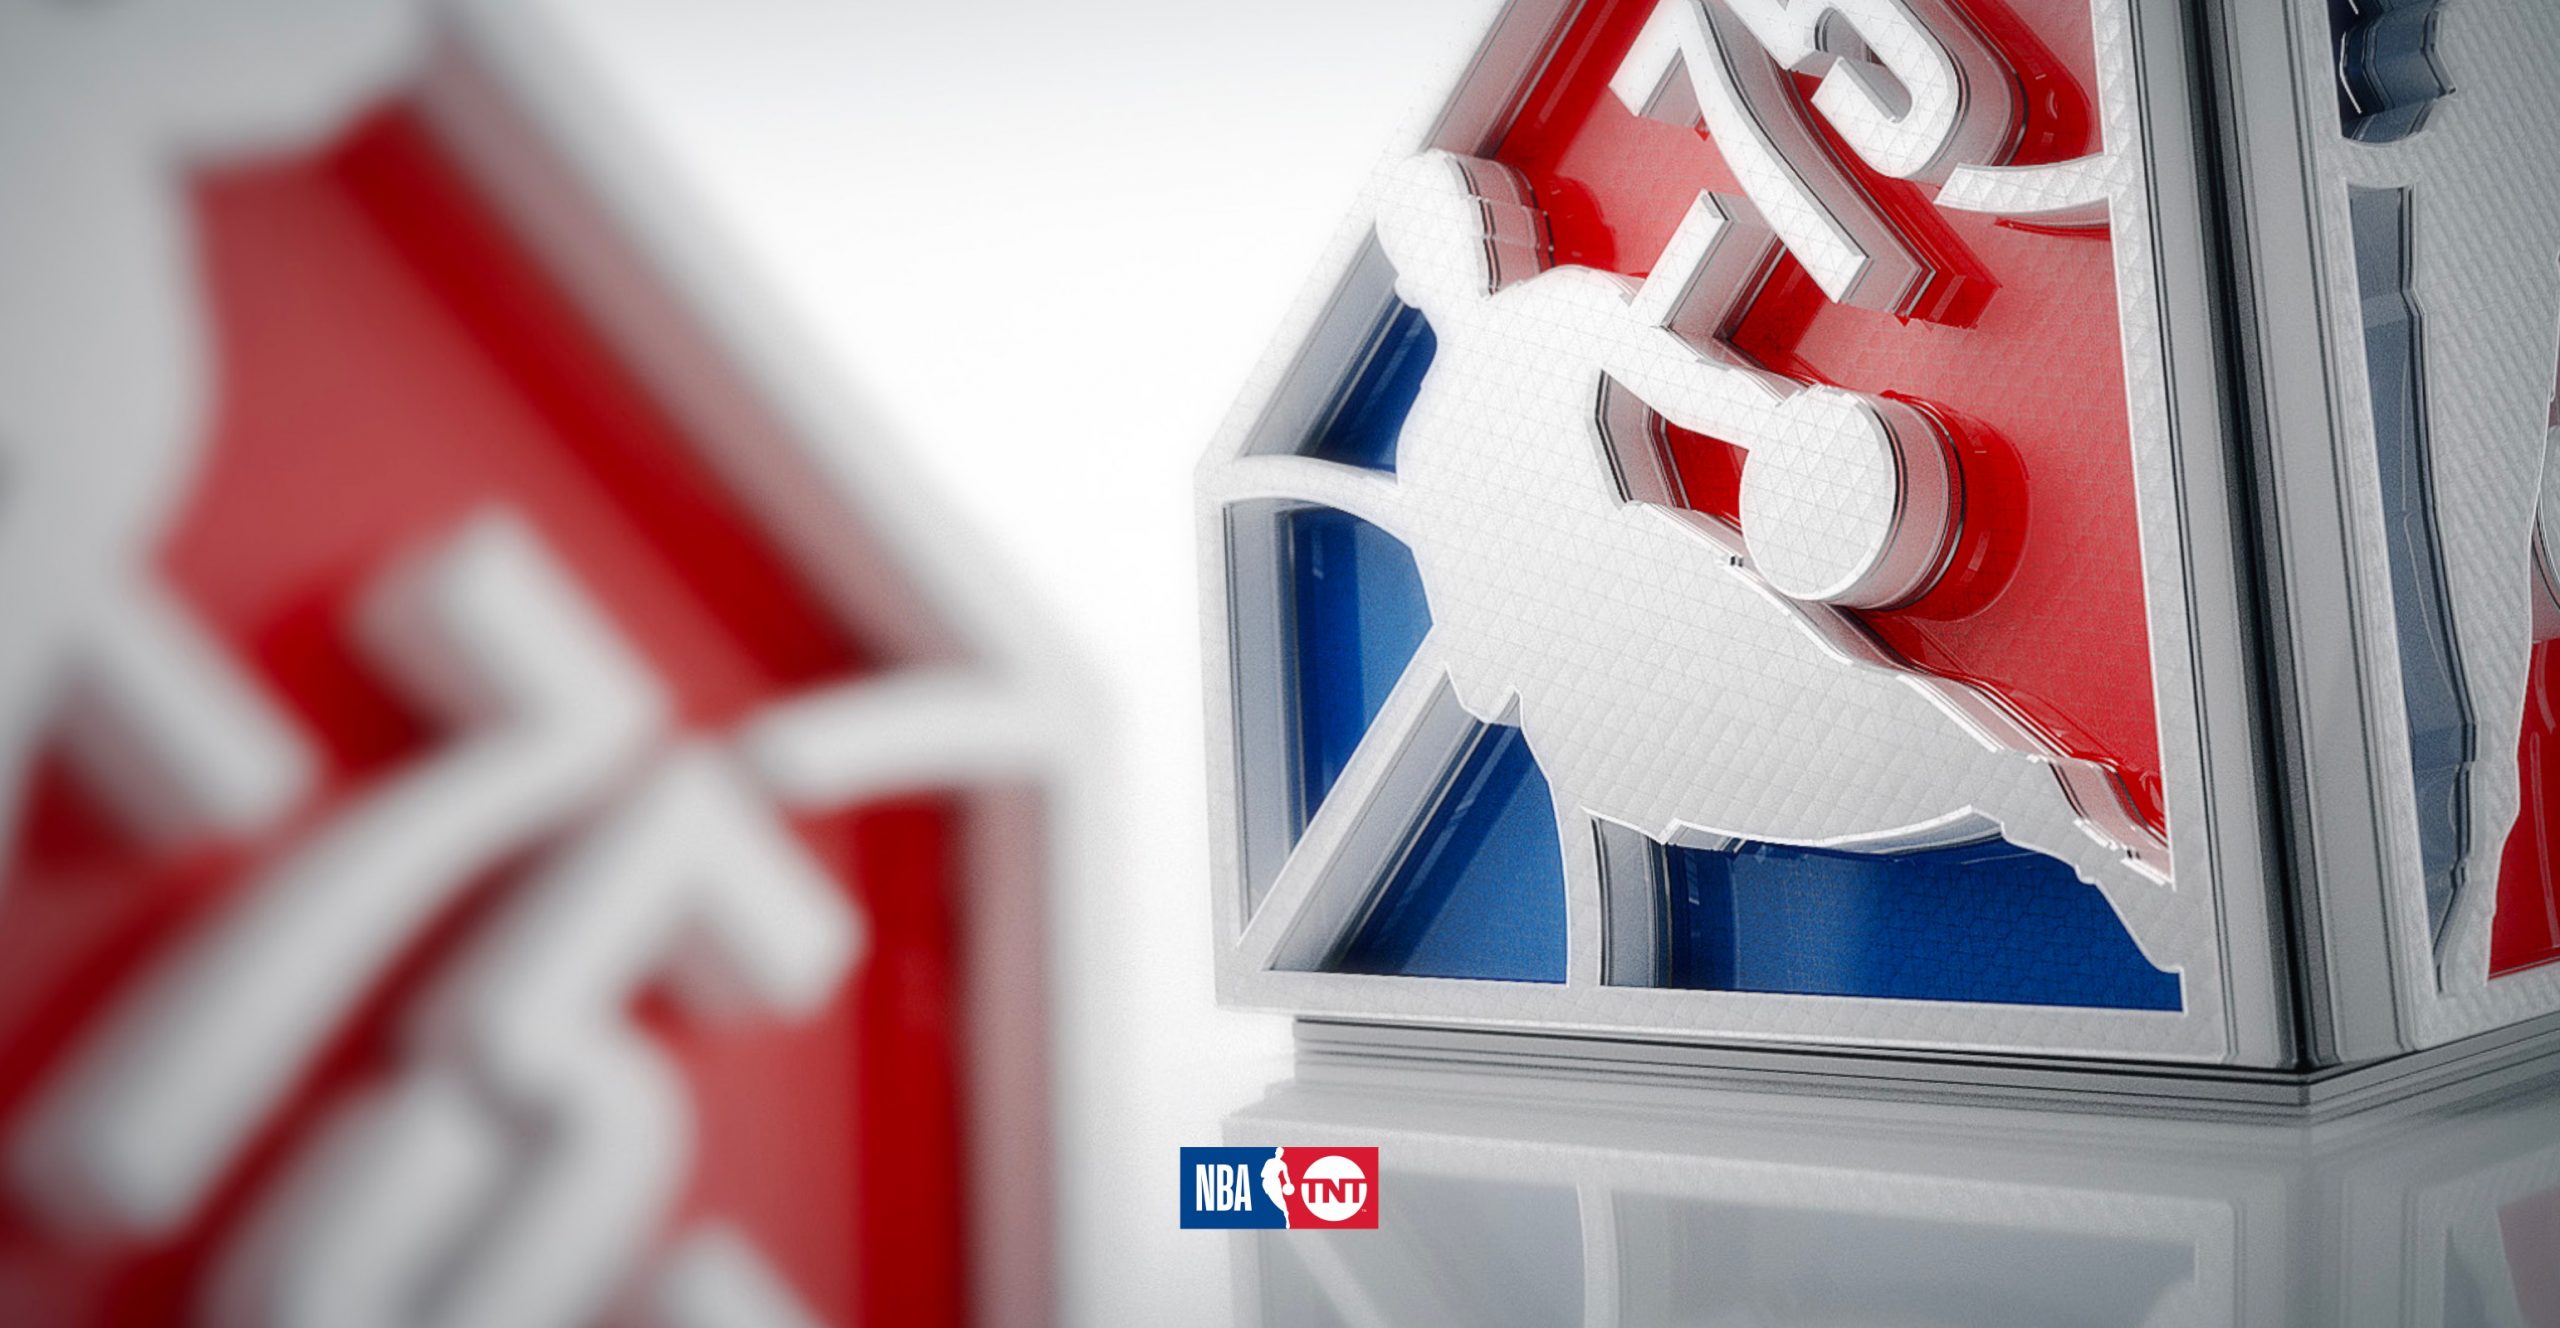 NBA on TNT - NBA on TNT updated their cover photo.